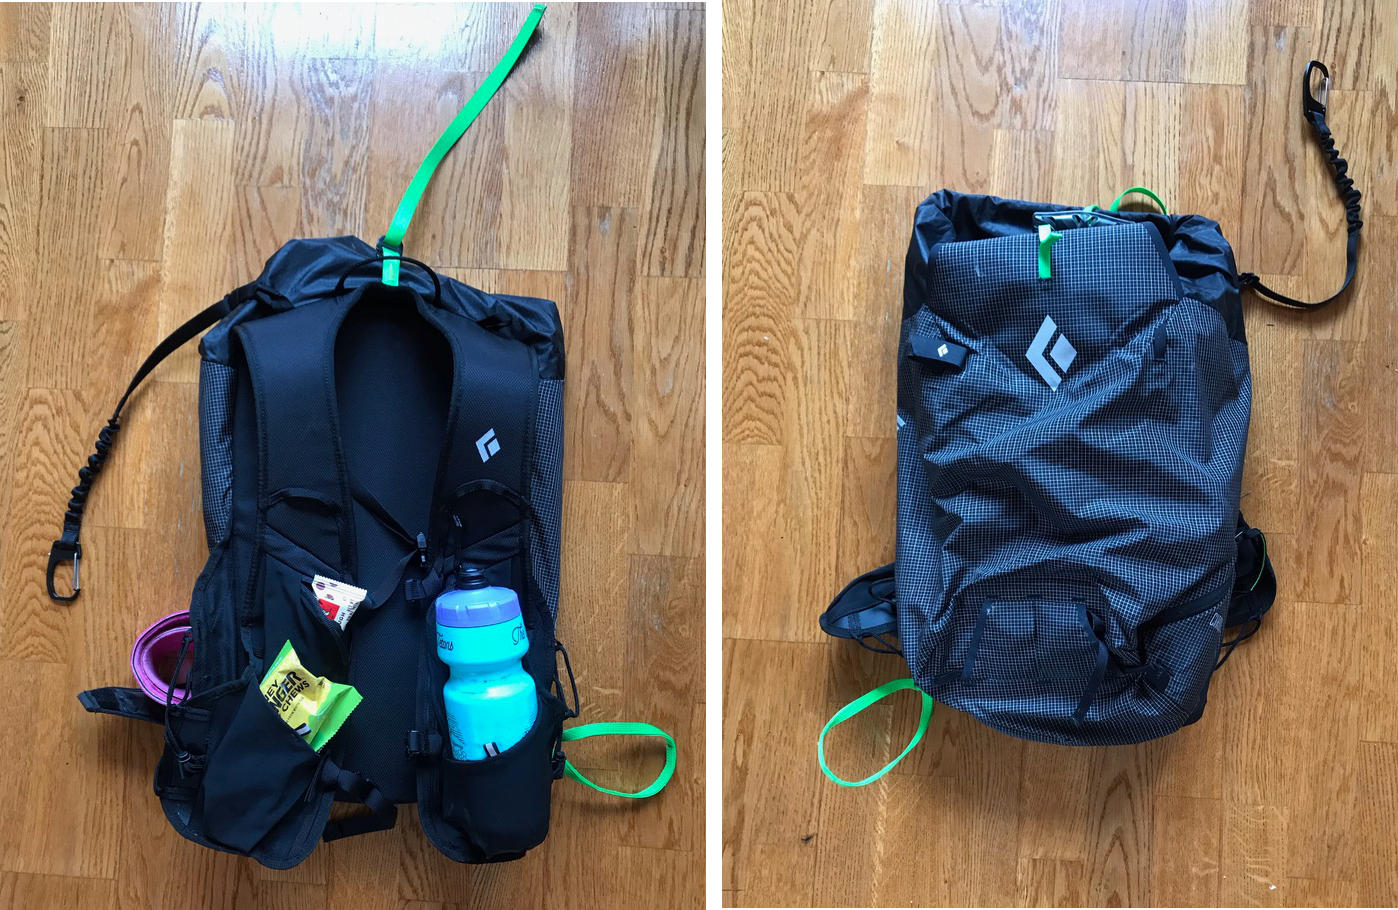 The Black Diamond Cirque 22 combines running vest style shoulder straps with the minimal aspects of a skimo pack.  Left: The shoulder straps have zippered and open pouches for snacks and water bottles. The trap door on the side of the pack offers secure access to skins or whatever else you want to stuff in there.